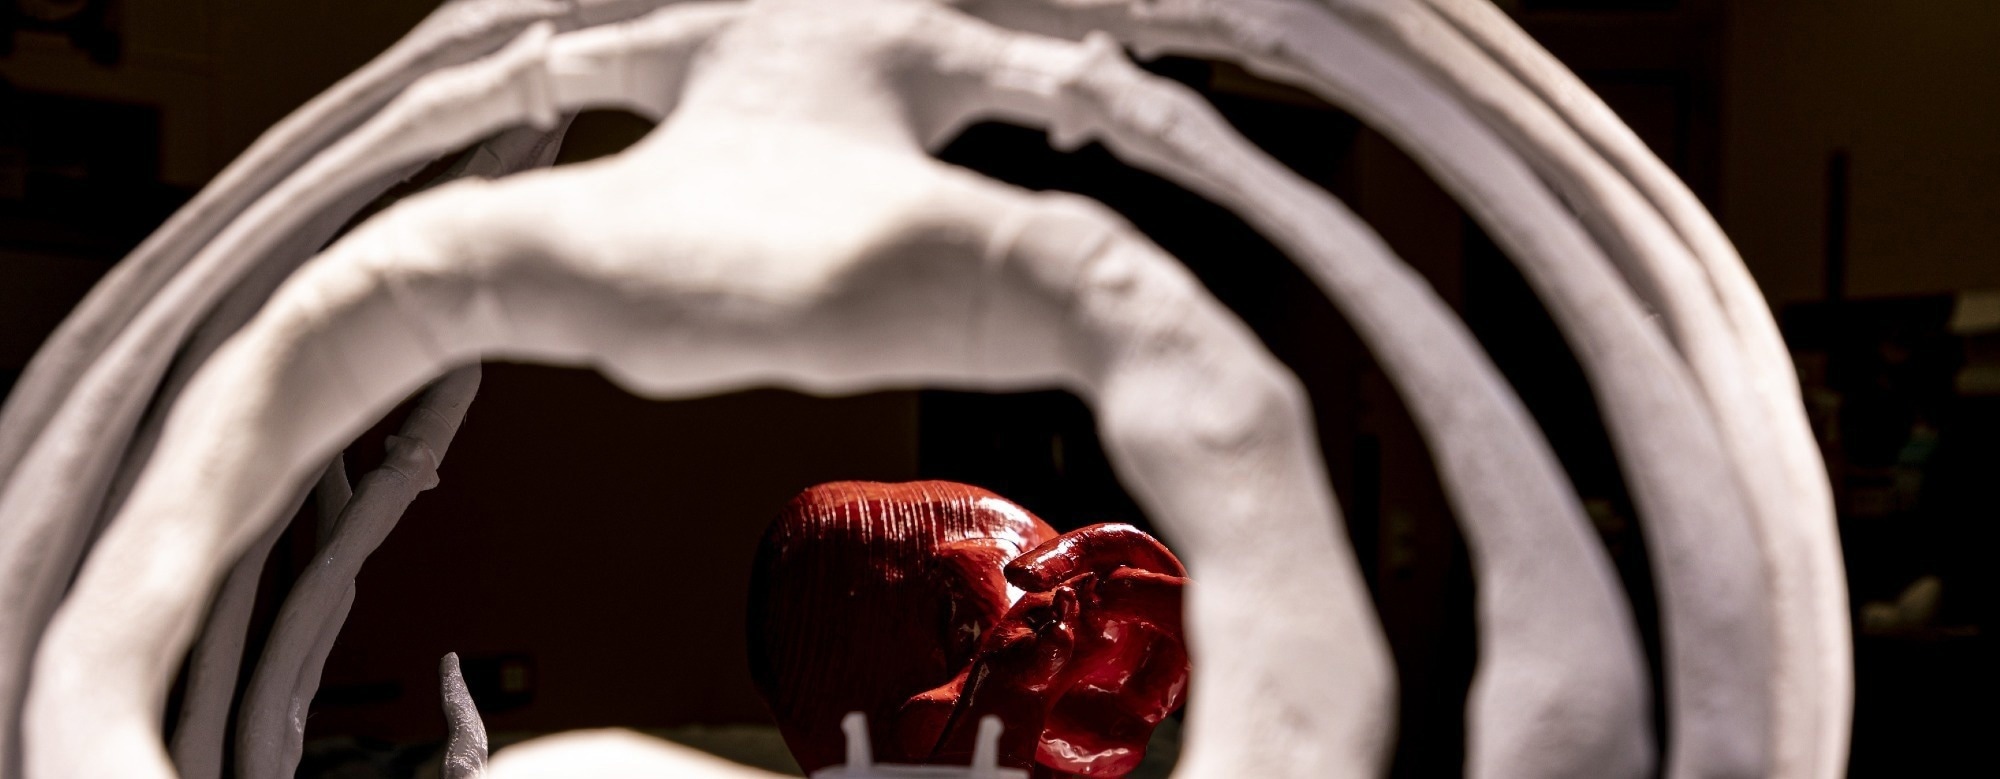 Realistic 3D-Printed Thoracic Models for Surgical Training